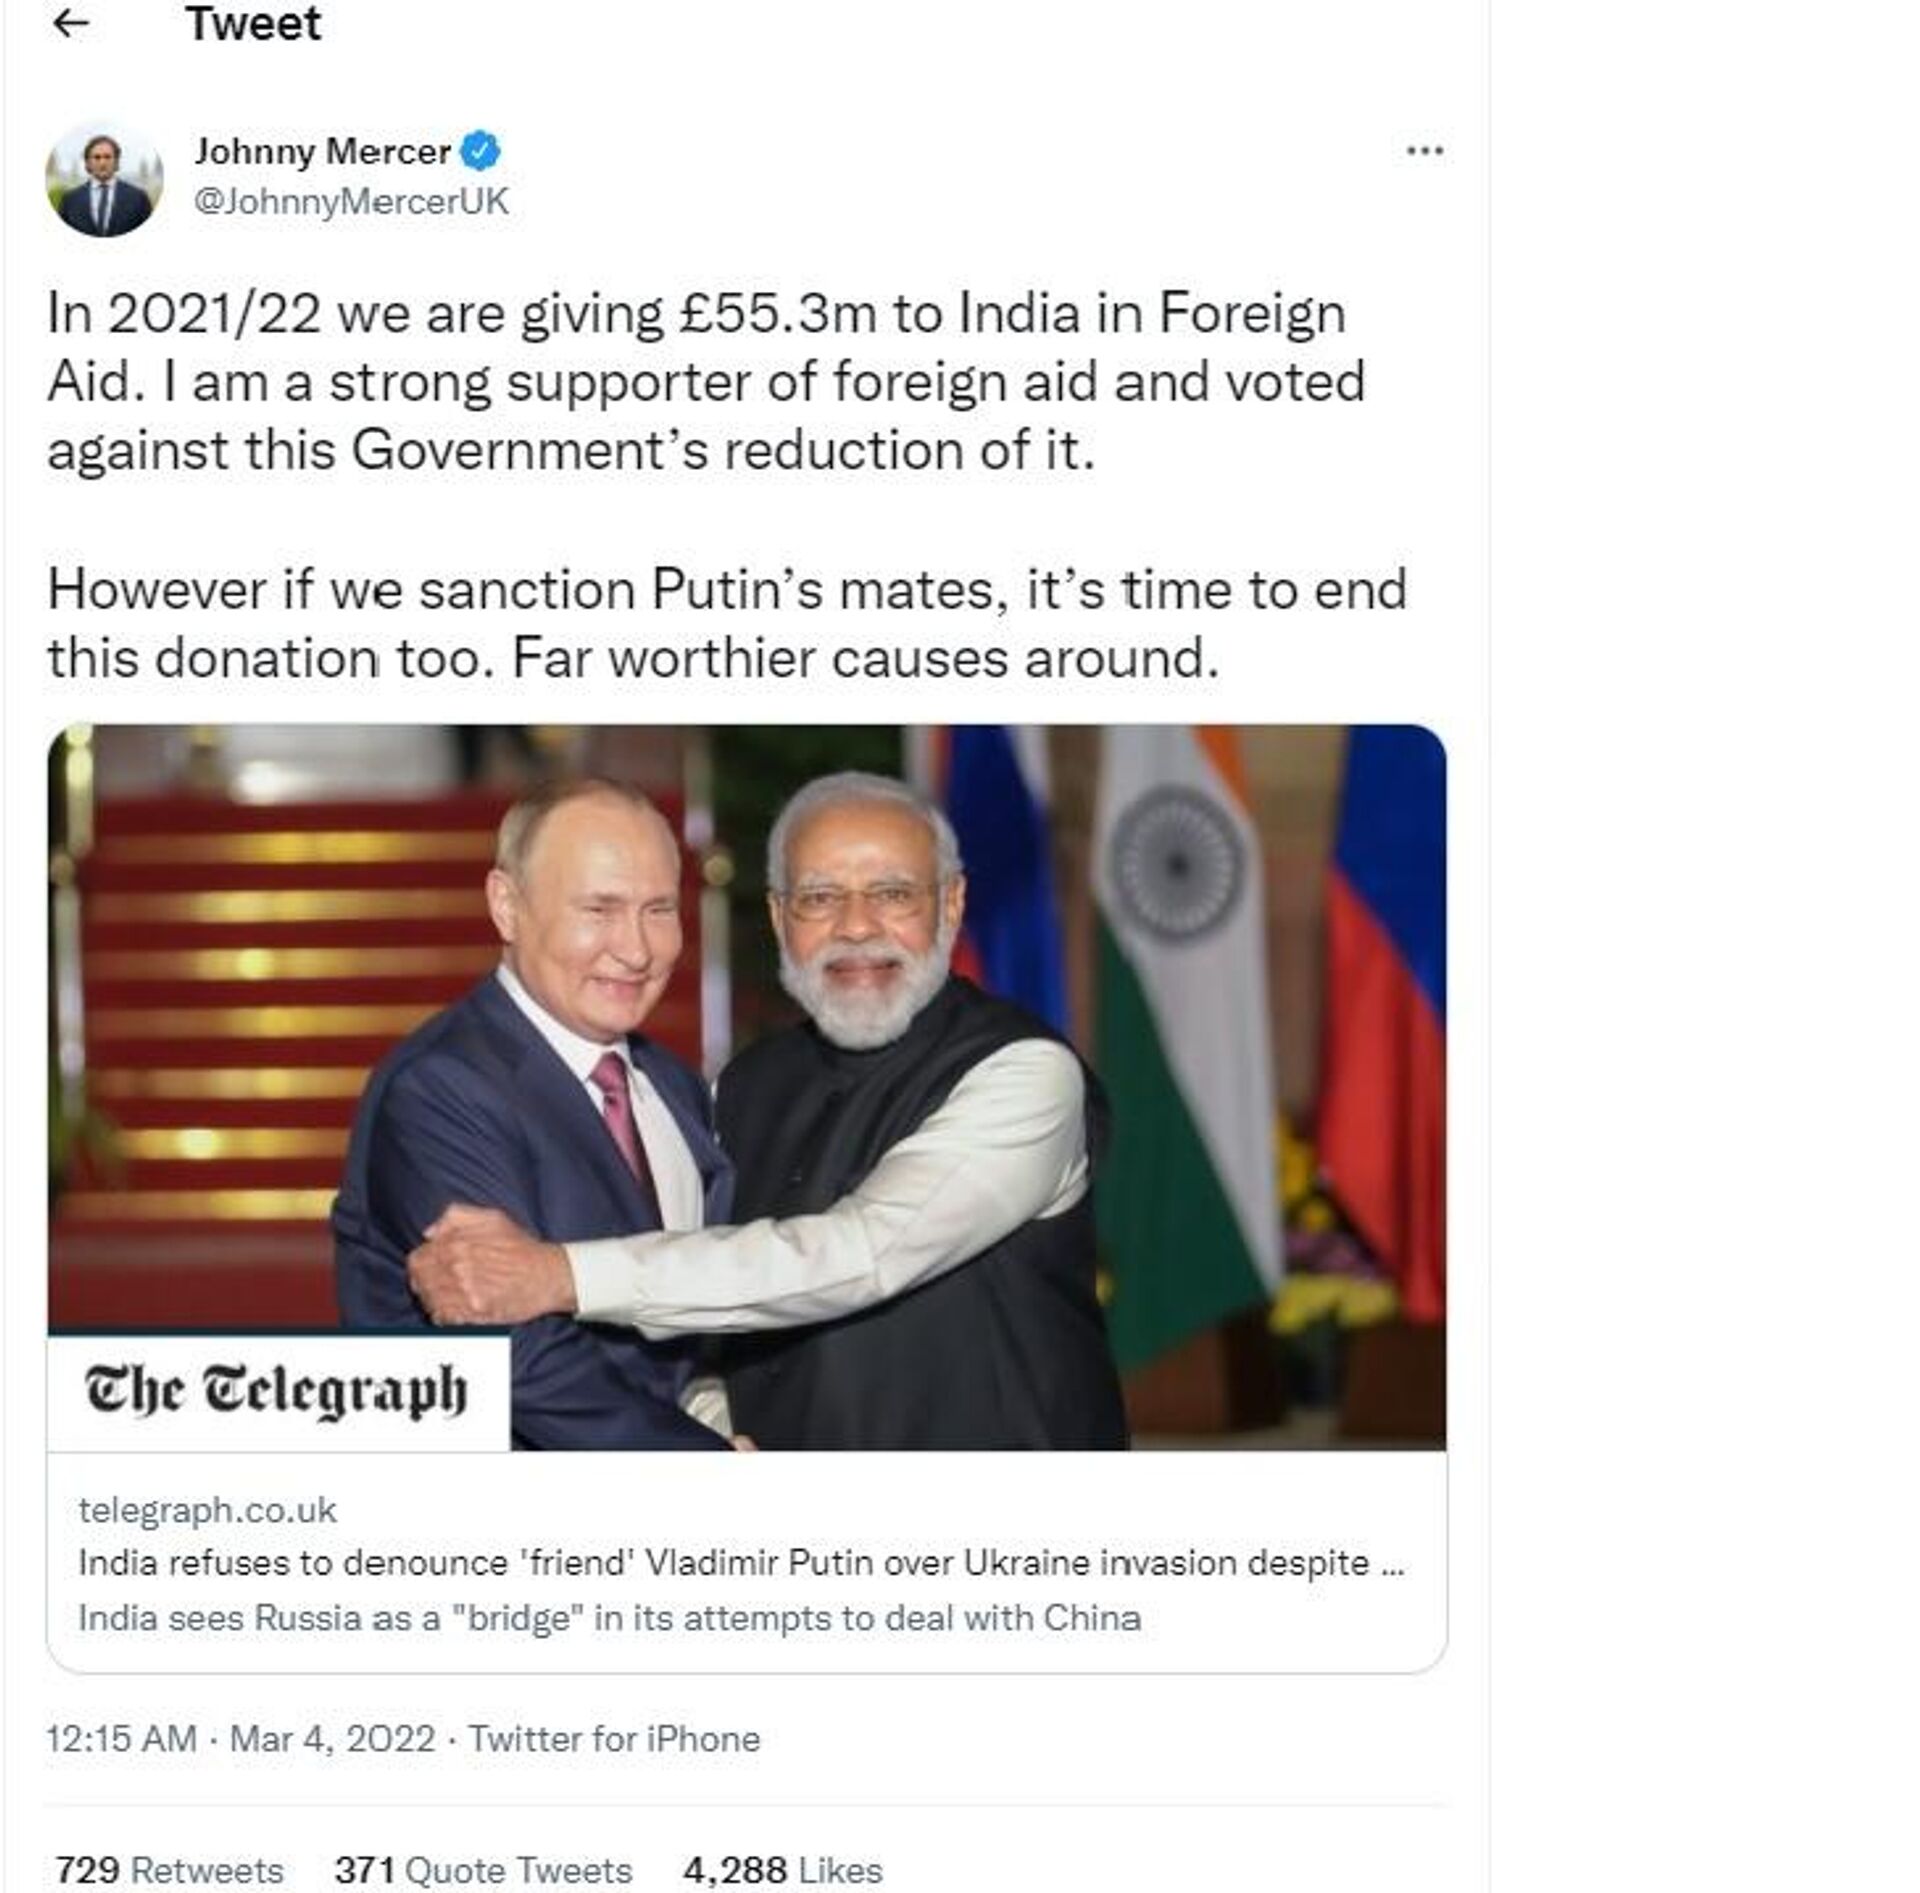 Tory MP calls for ending foreign aid to India over its stand on Russia - Sputnik International, 1920, 04.03.2022